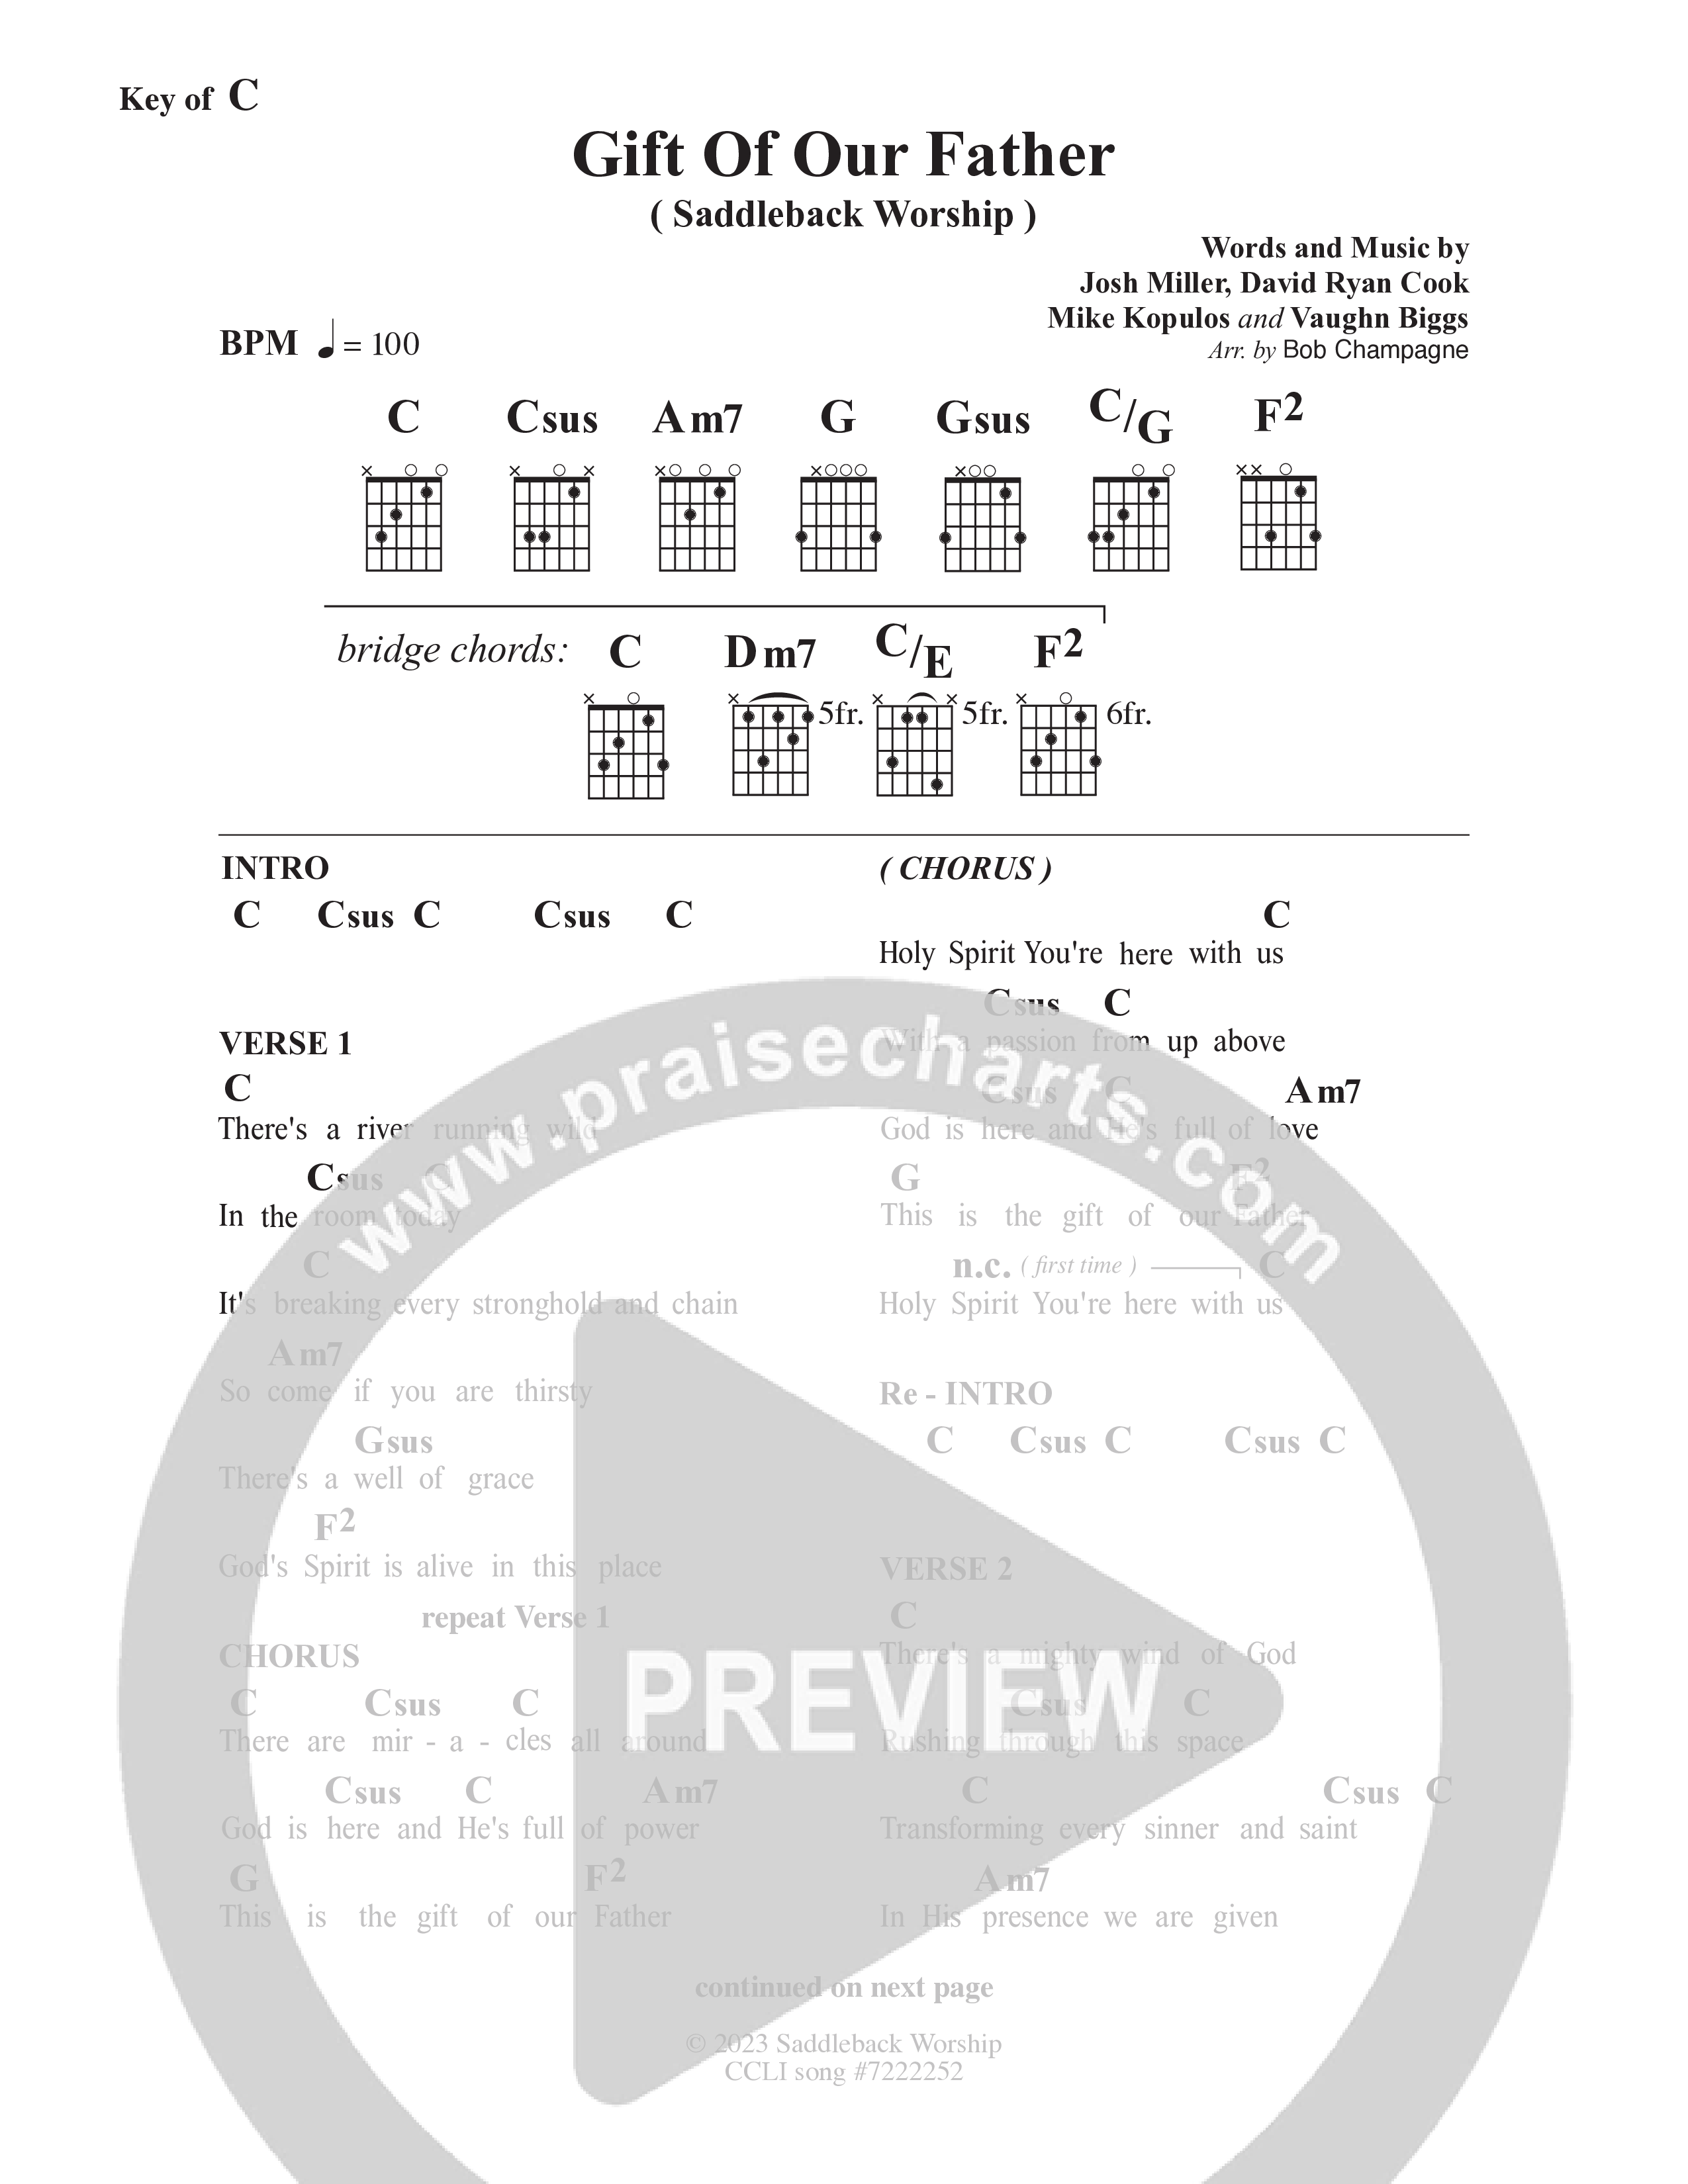 Gift Of Our Father (Live) Chord Chart (Saddleback Worship)